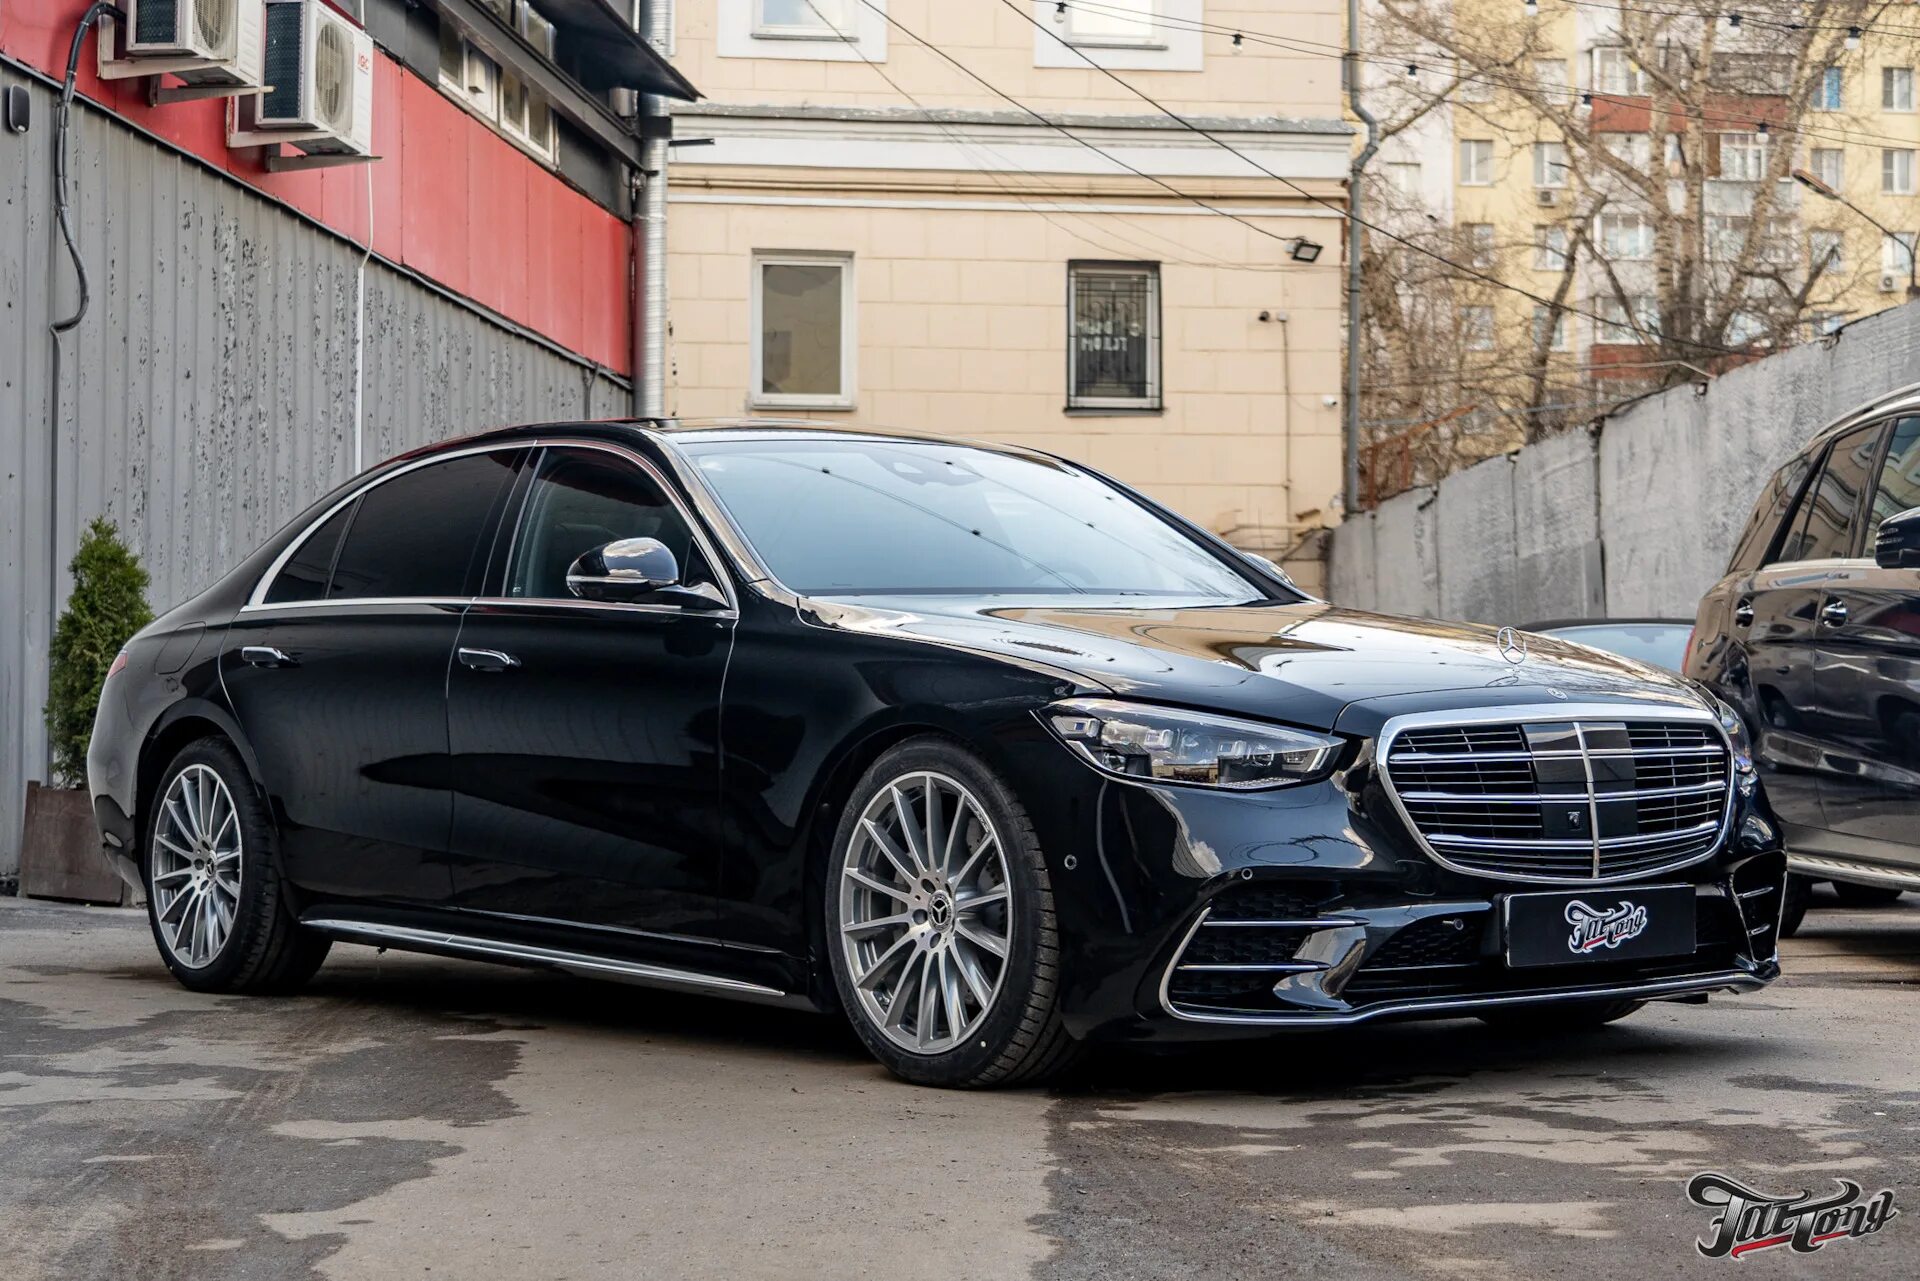 Mercedes Benz w223 Maybach. S class w223. Mercedes s w223. Мерседес 223 s класс. Купить мерседес 223